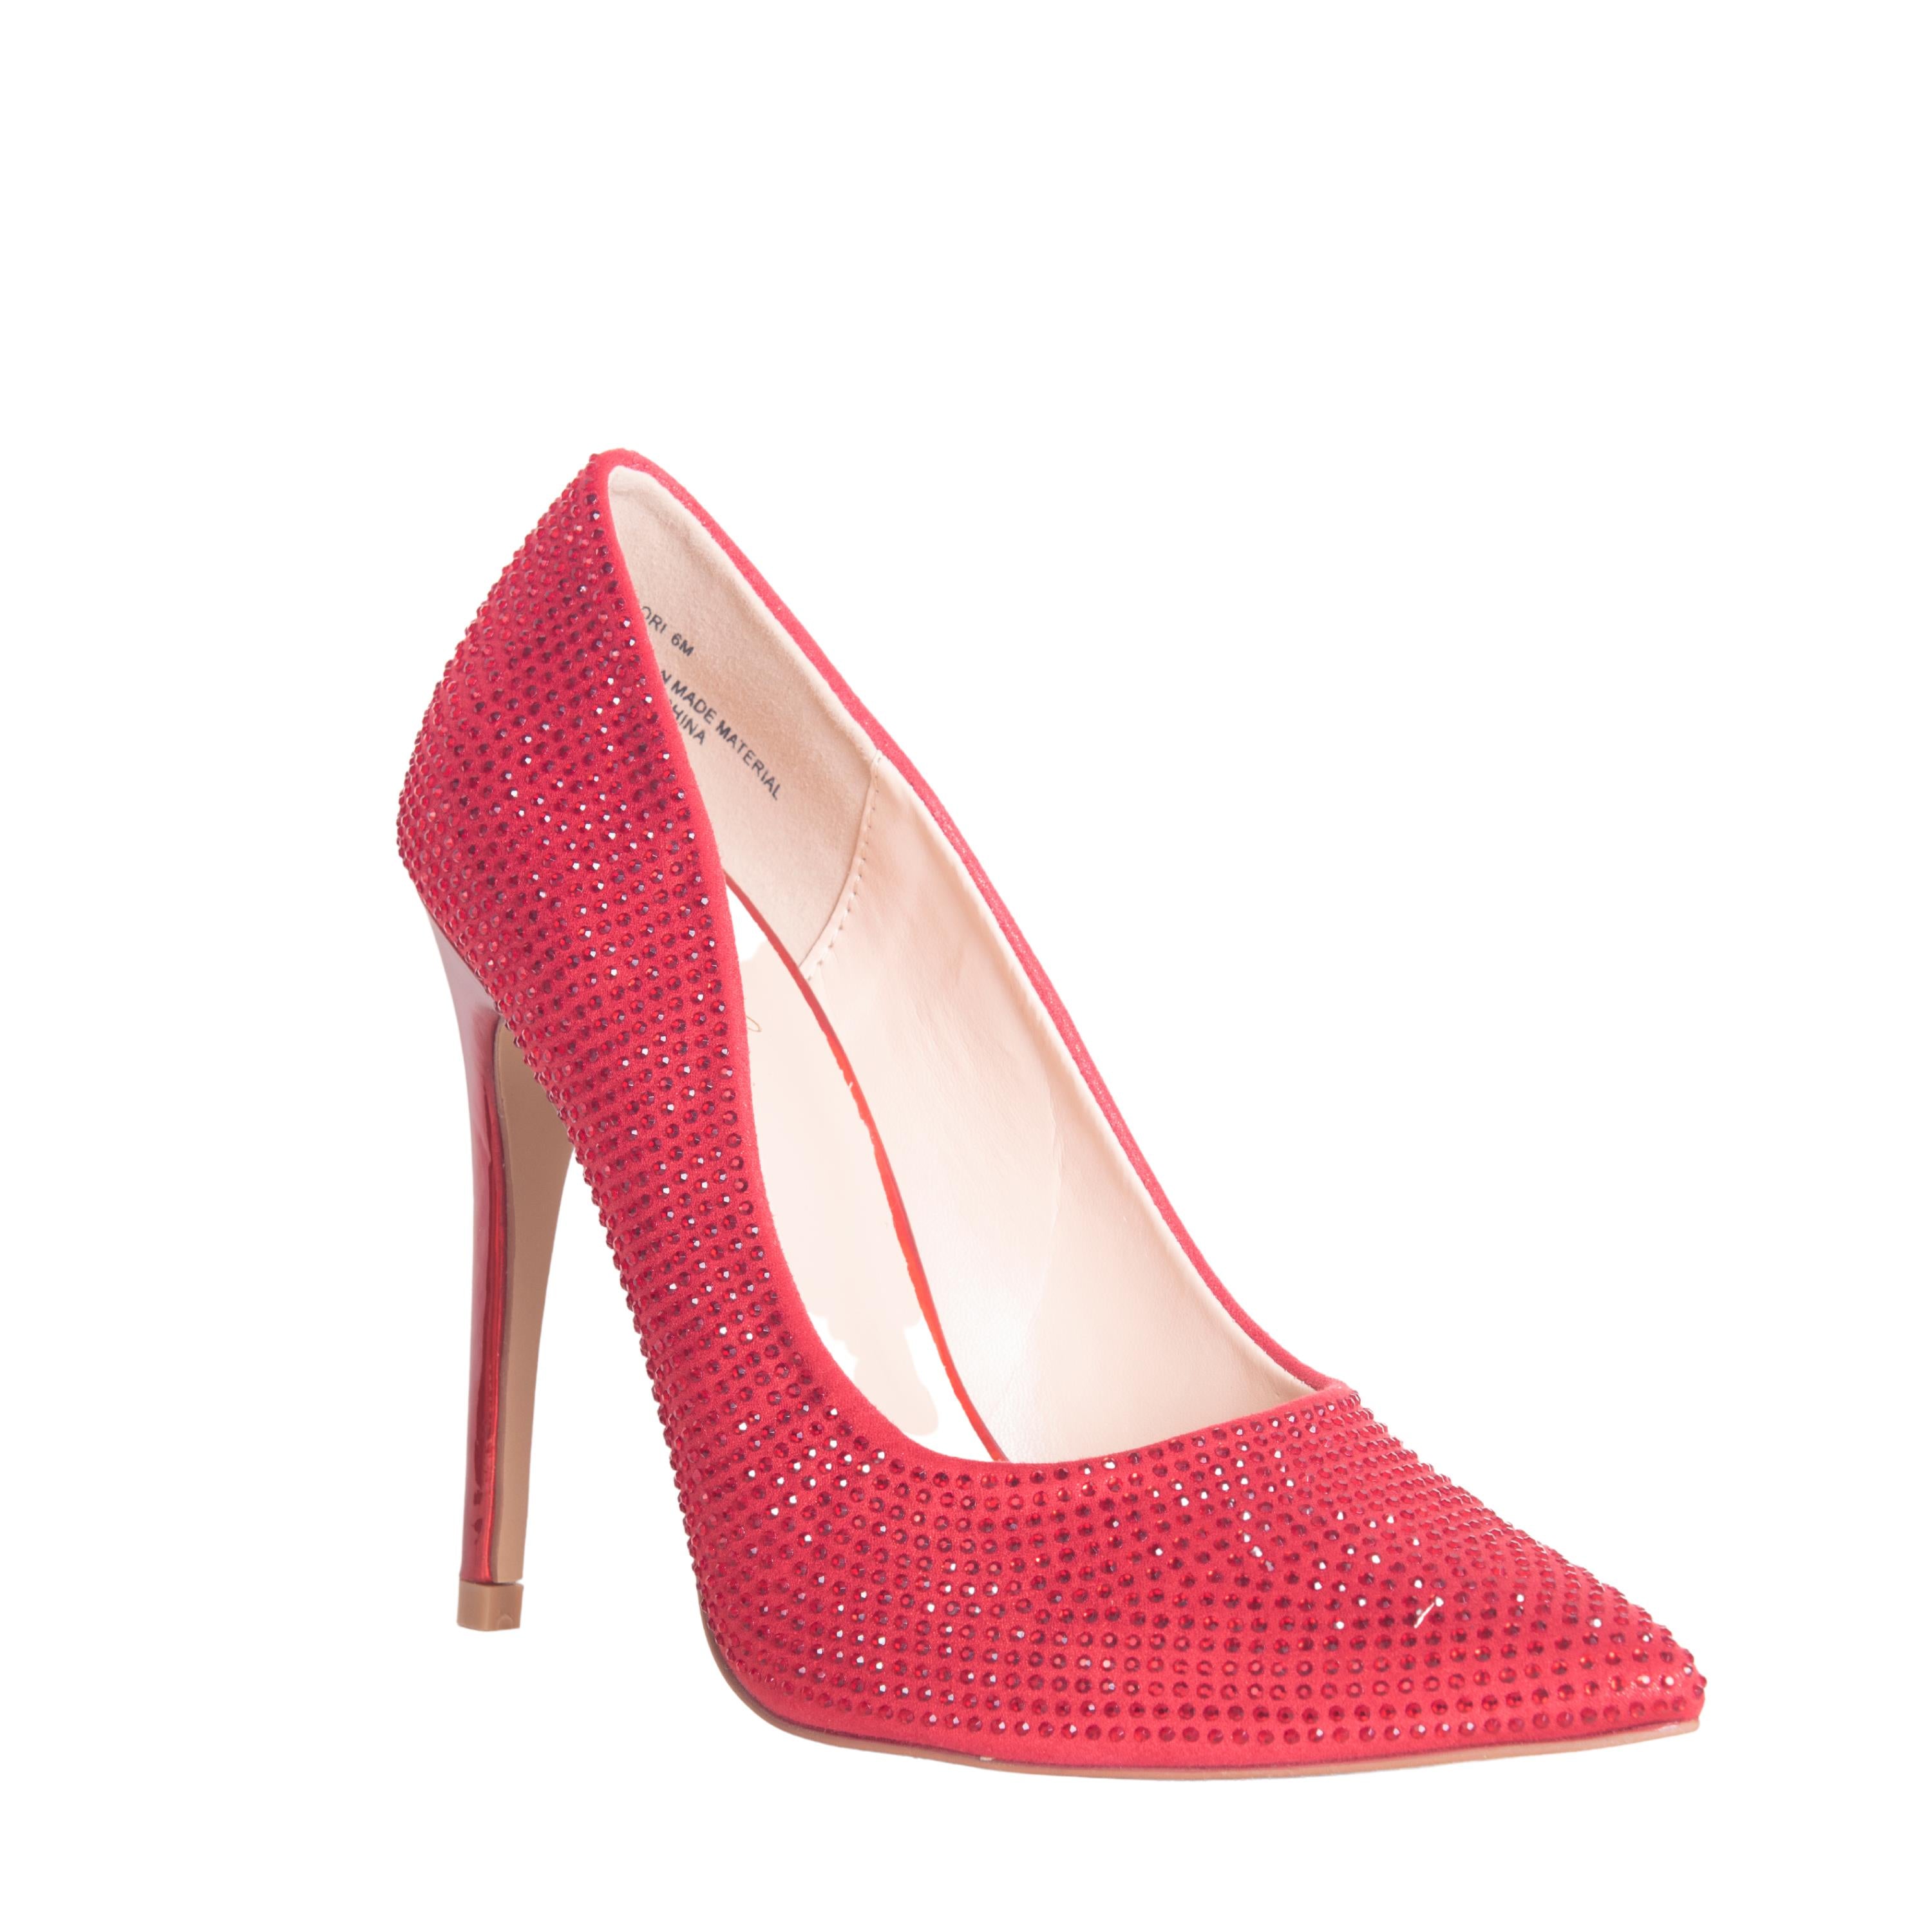 DORI RED HIGH HEEL POINTED TOE PUMPS WITH SPARKLING RHINESTONES